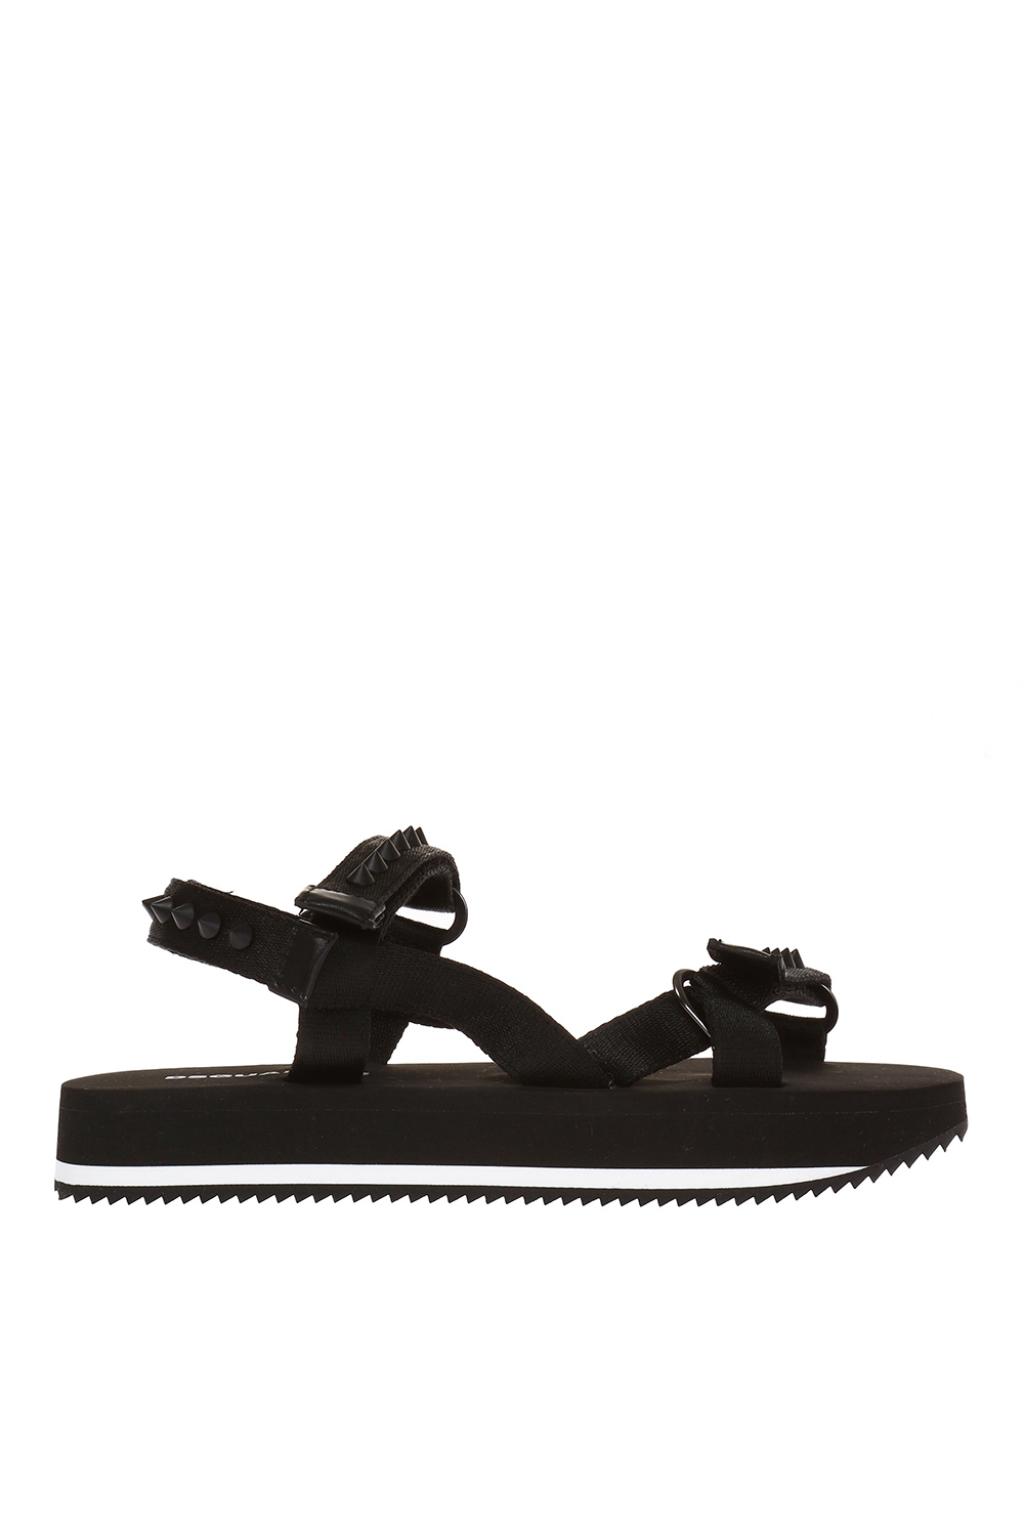 dsquared studded sandals